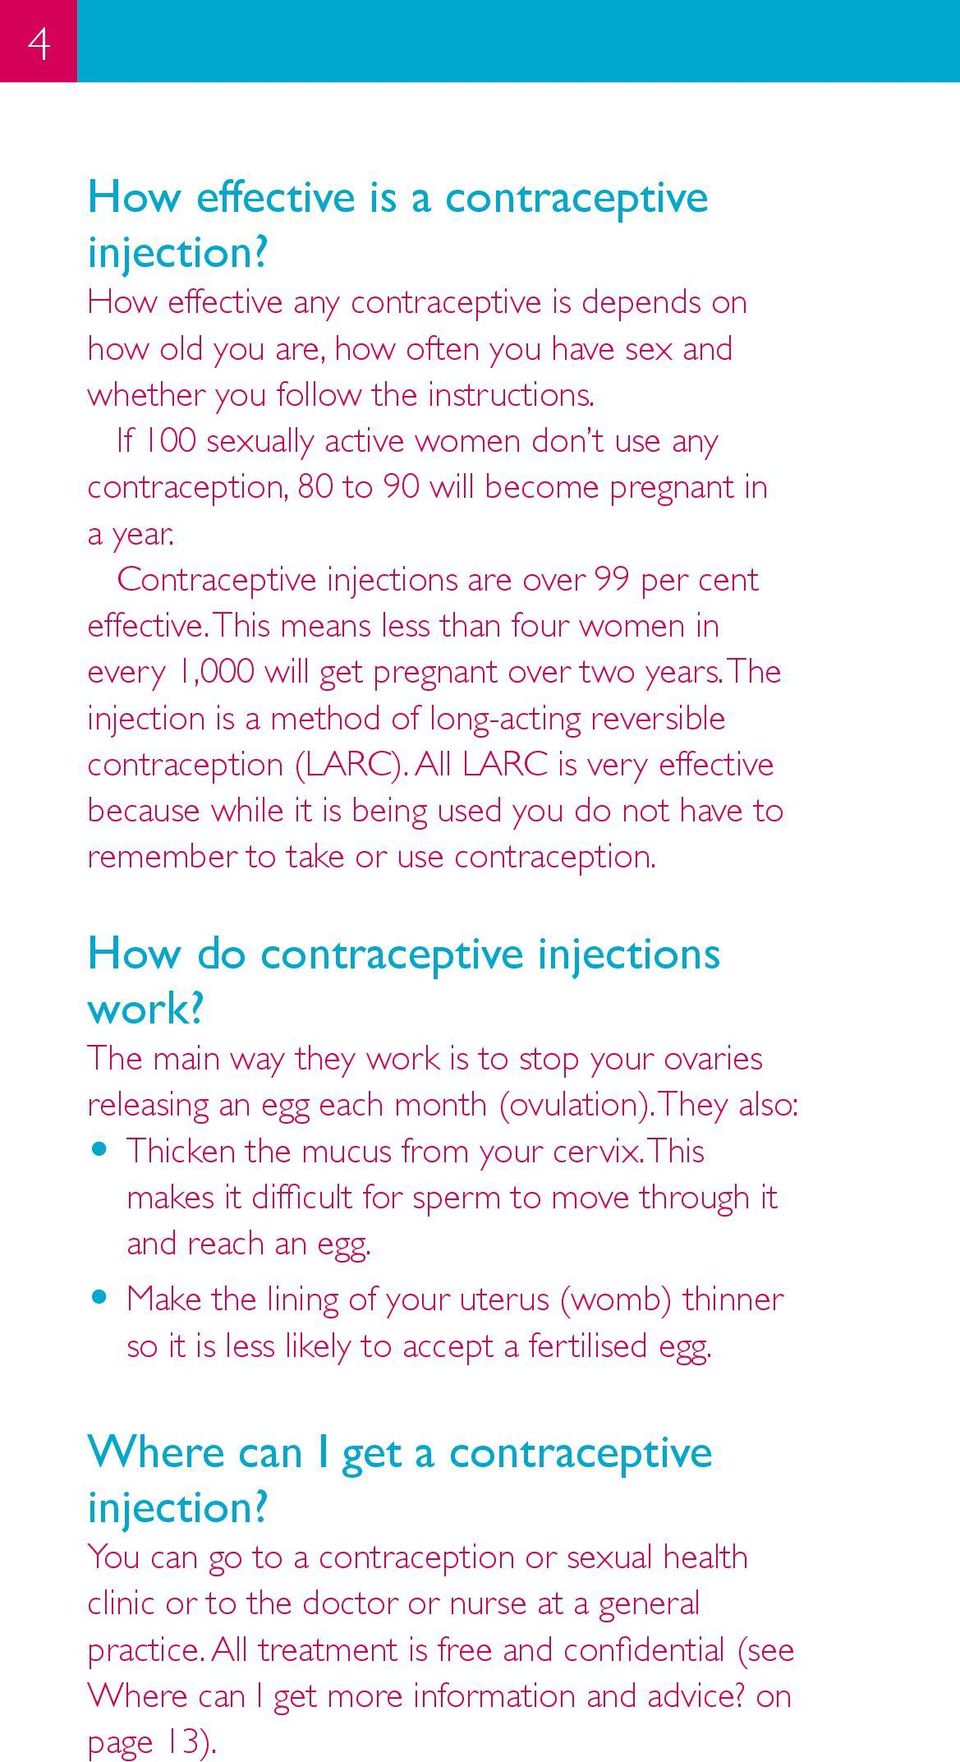 This means less than four women in every 1,000 will get pregnant over two years. The injection is a method of long-acting reversible contraception (LARC).